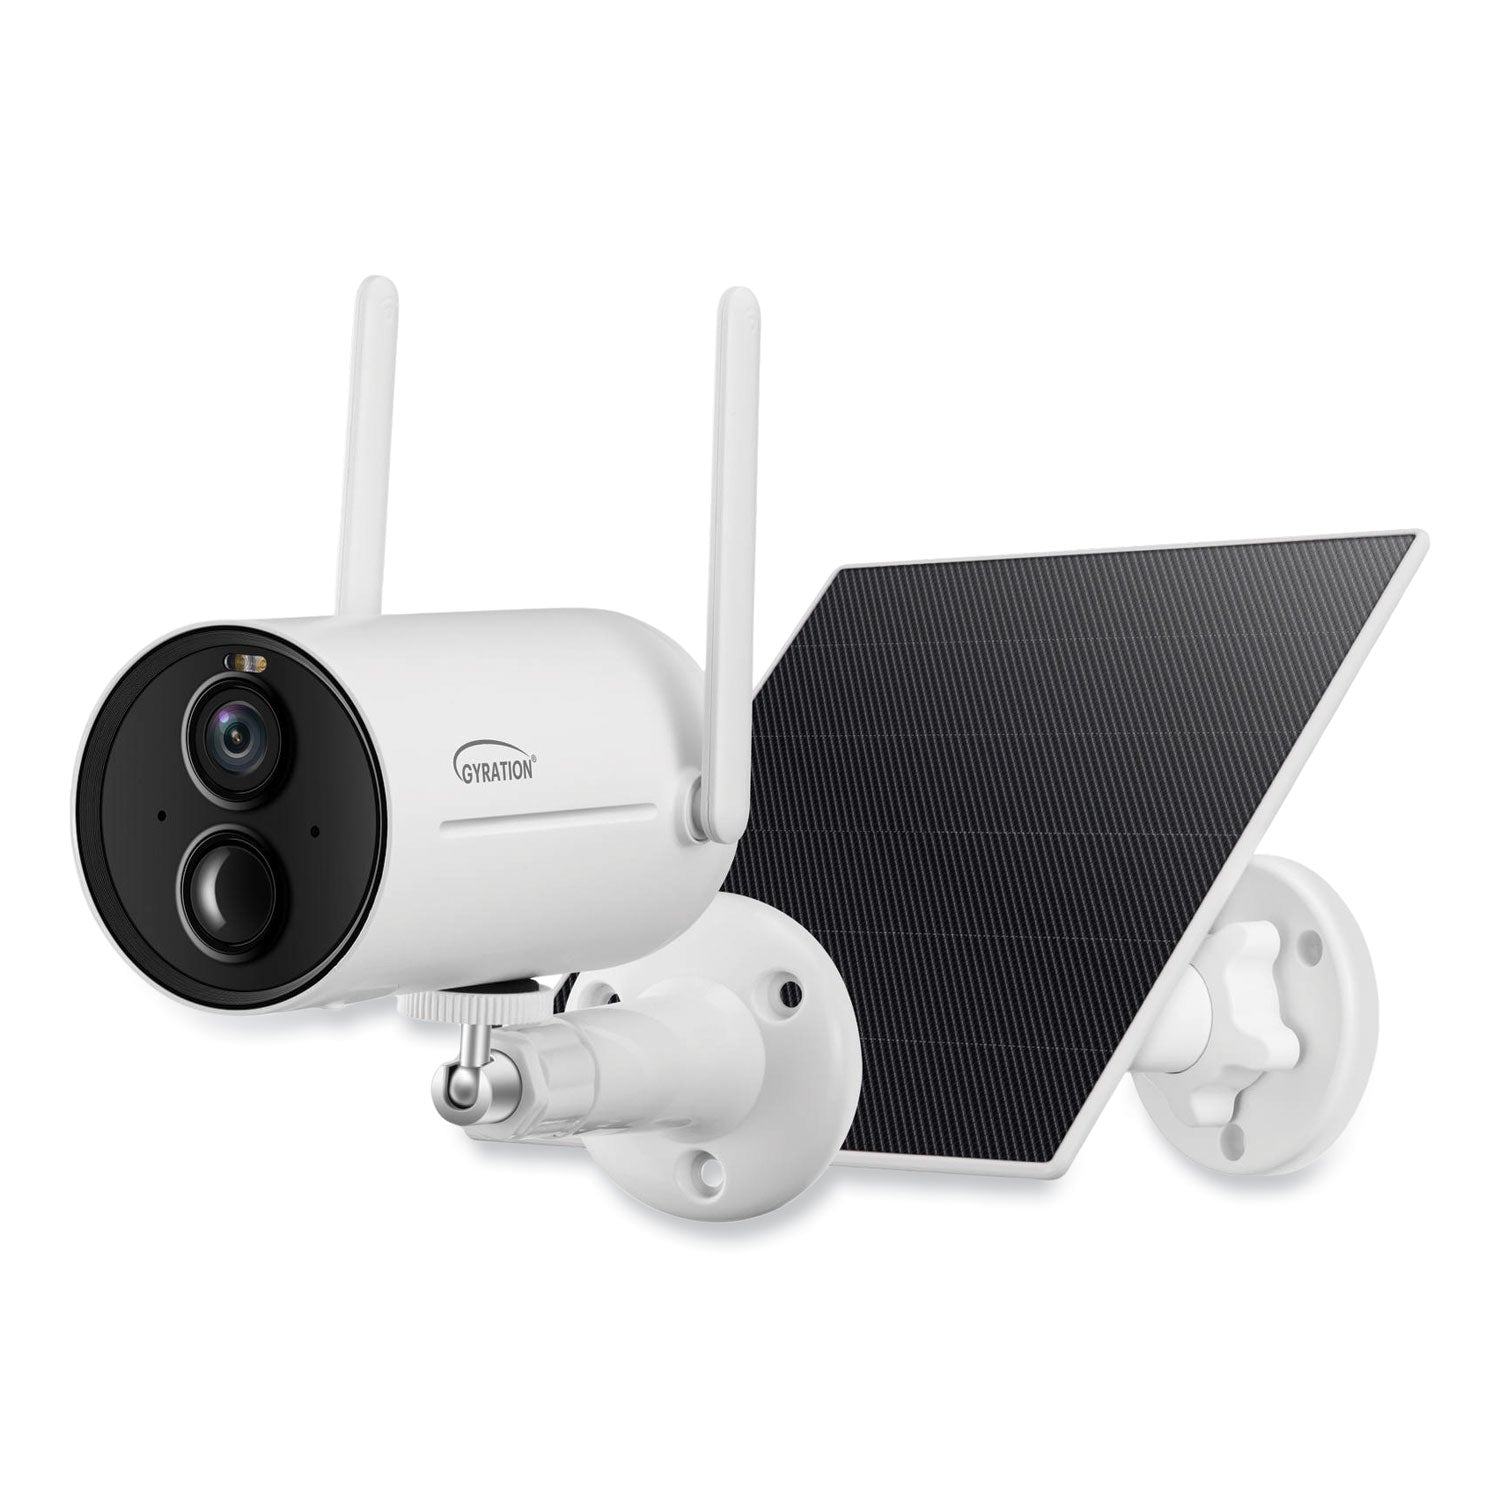 cyberview-3010-3mp-smart-wifi-bullet-camera-with-solar-panel-2304-x-1296-pixels_adecybrview3010 - 4